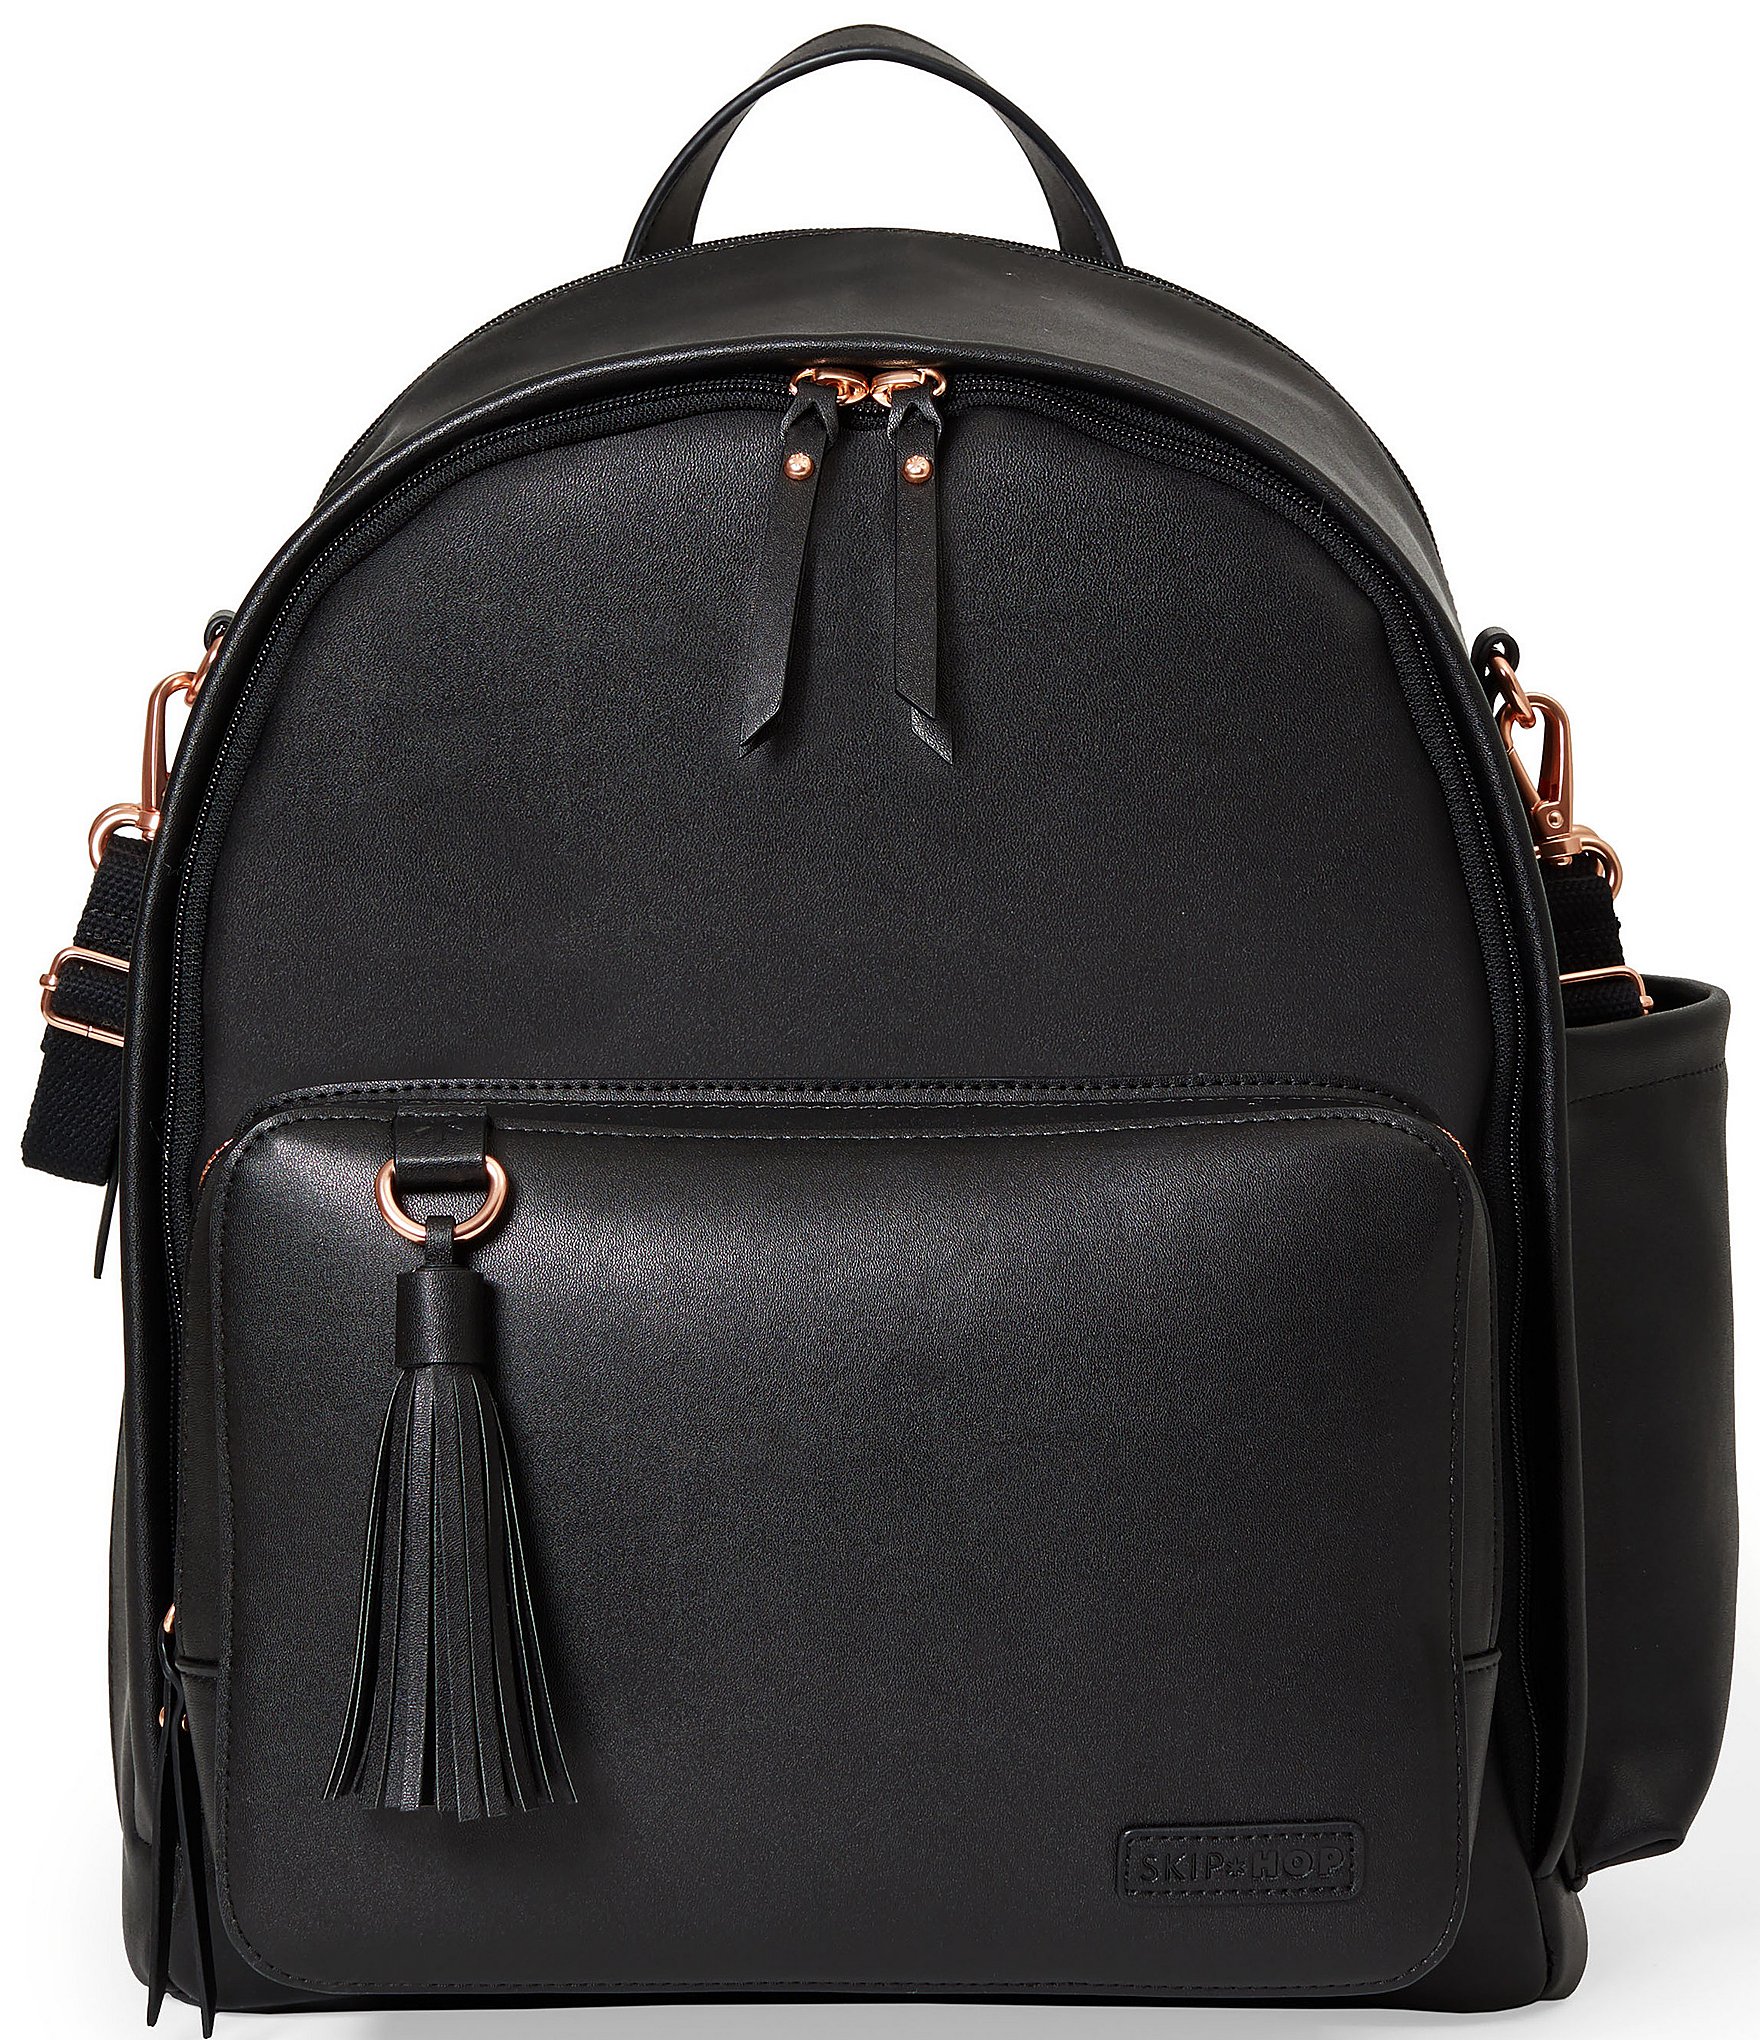 Greenwich Black Leather Large Bucket Bag